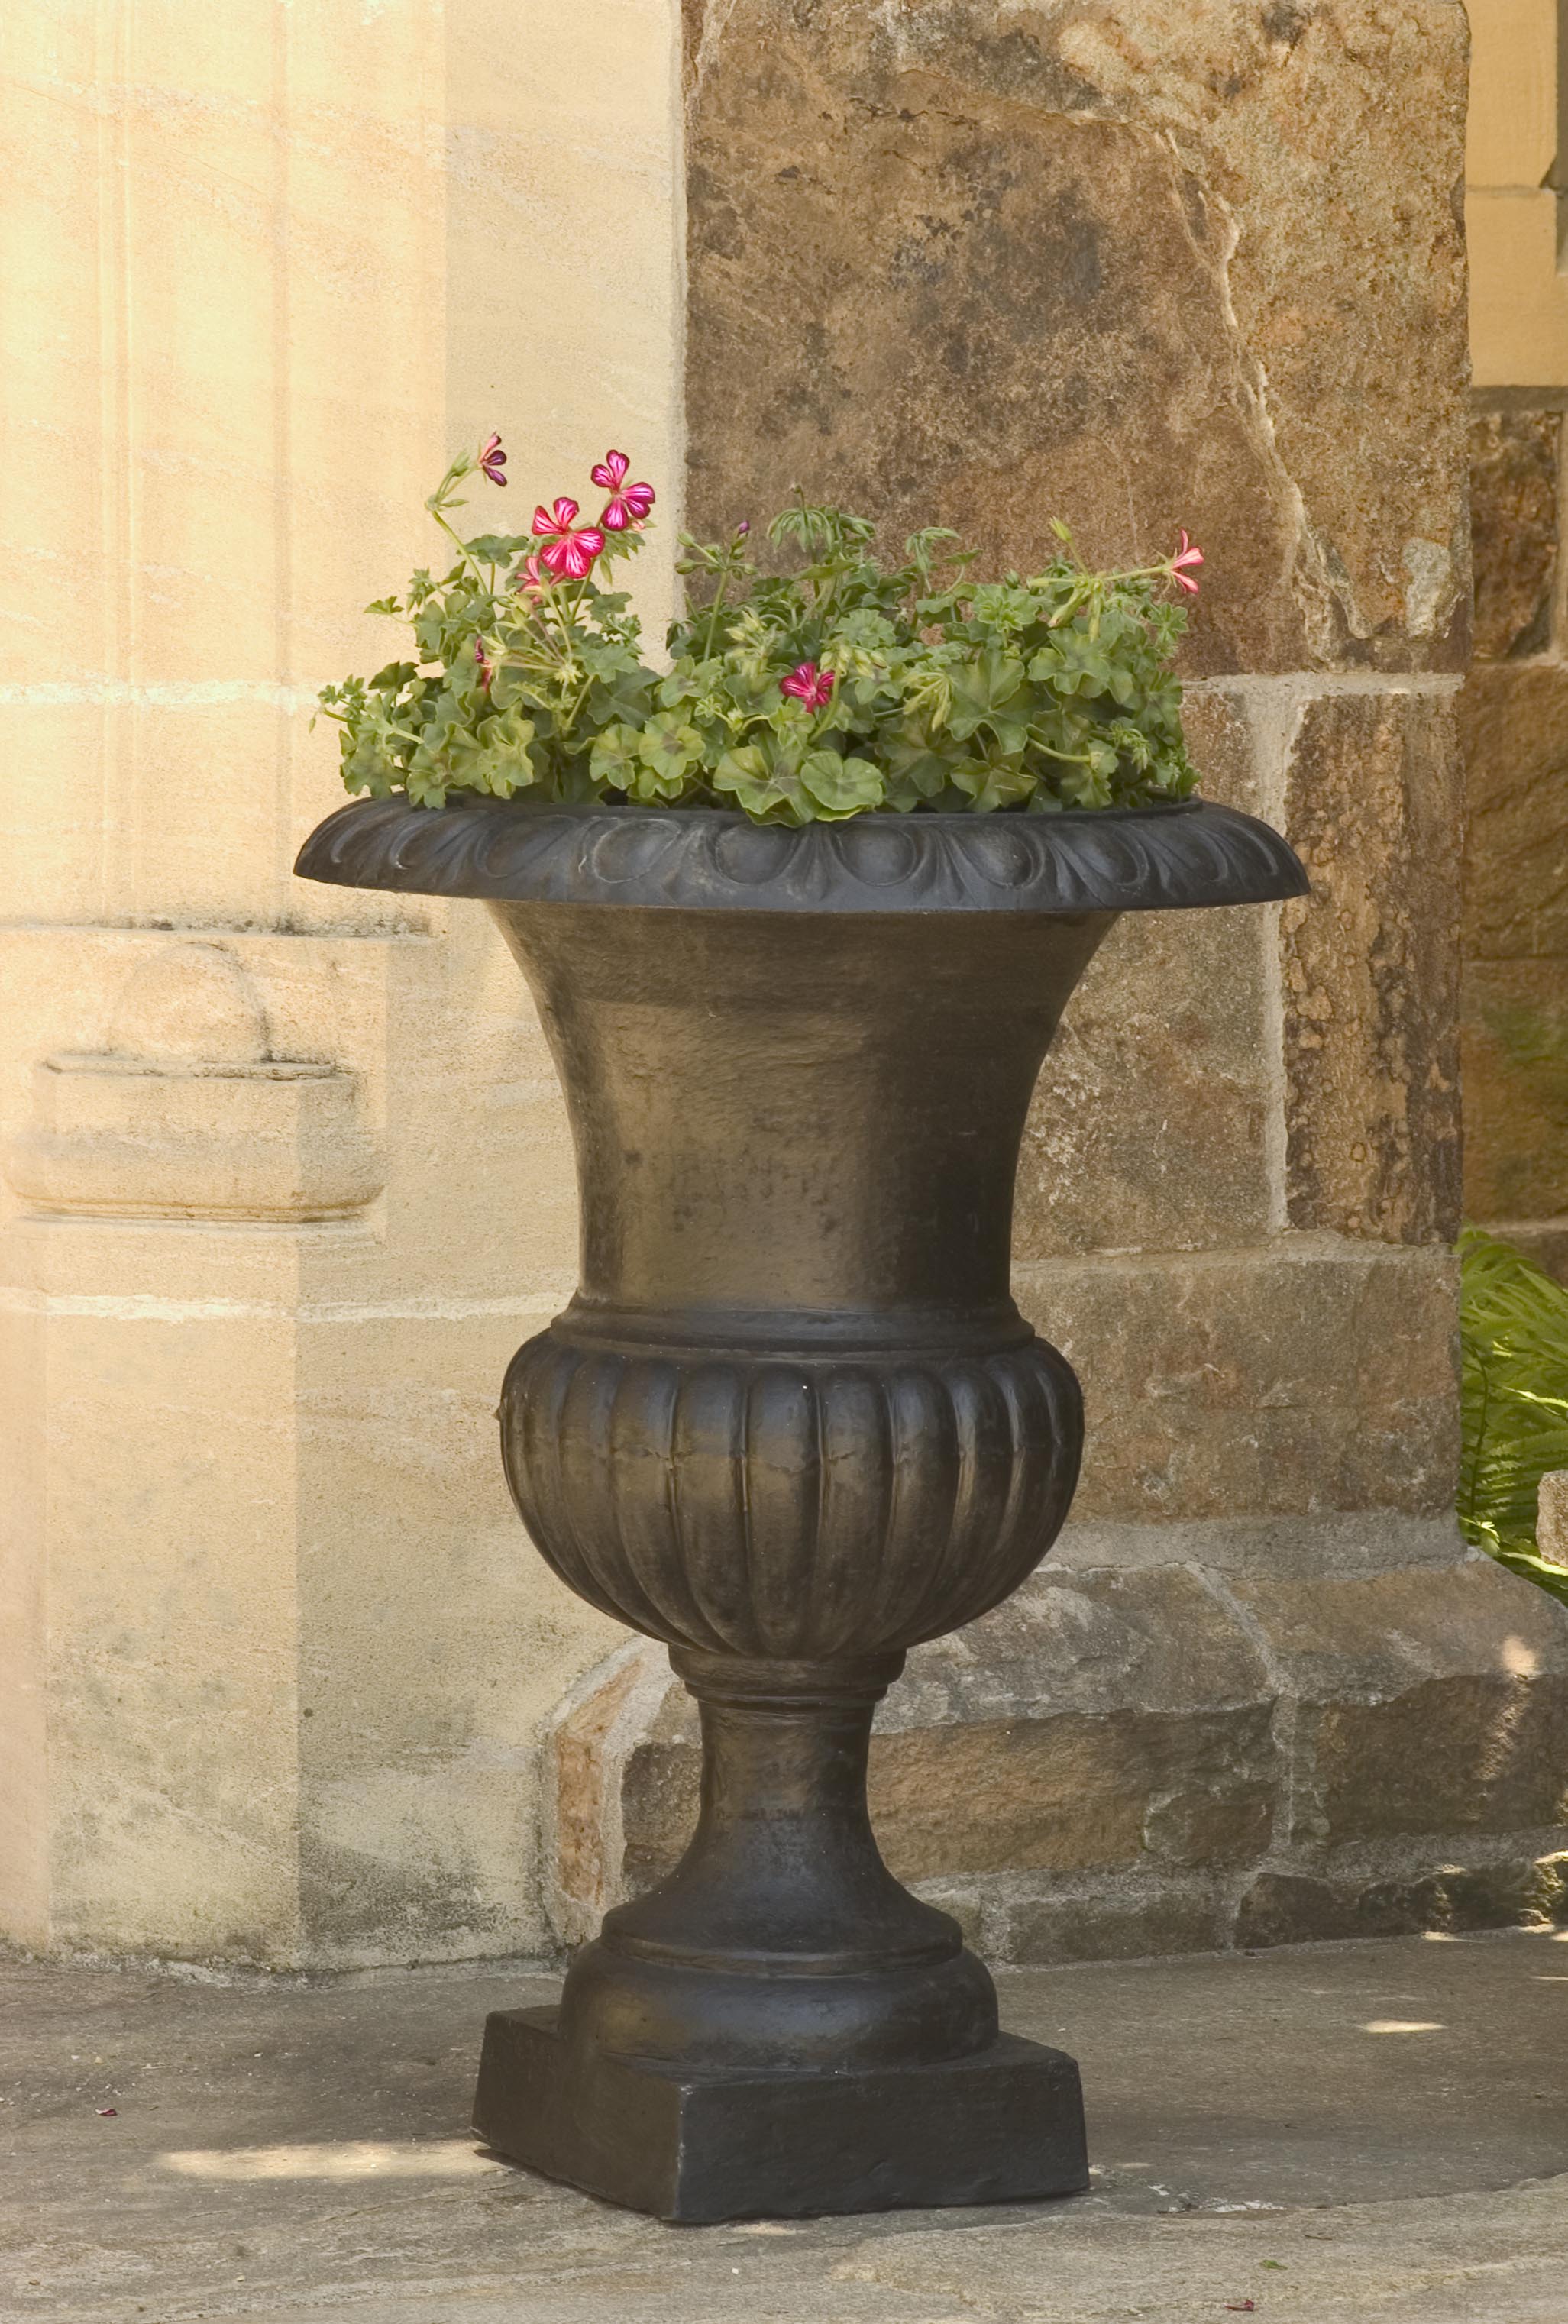 Accessorize Your Garden With Easy-Care Containers from 